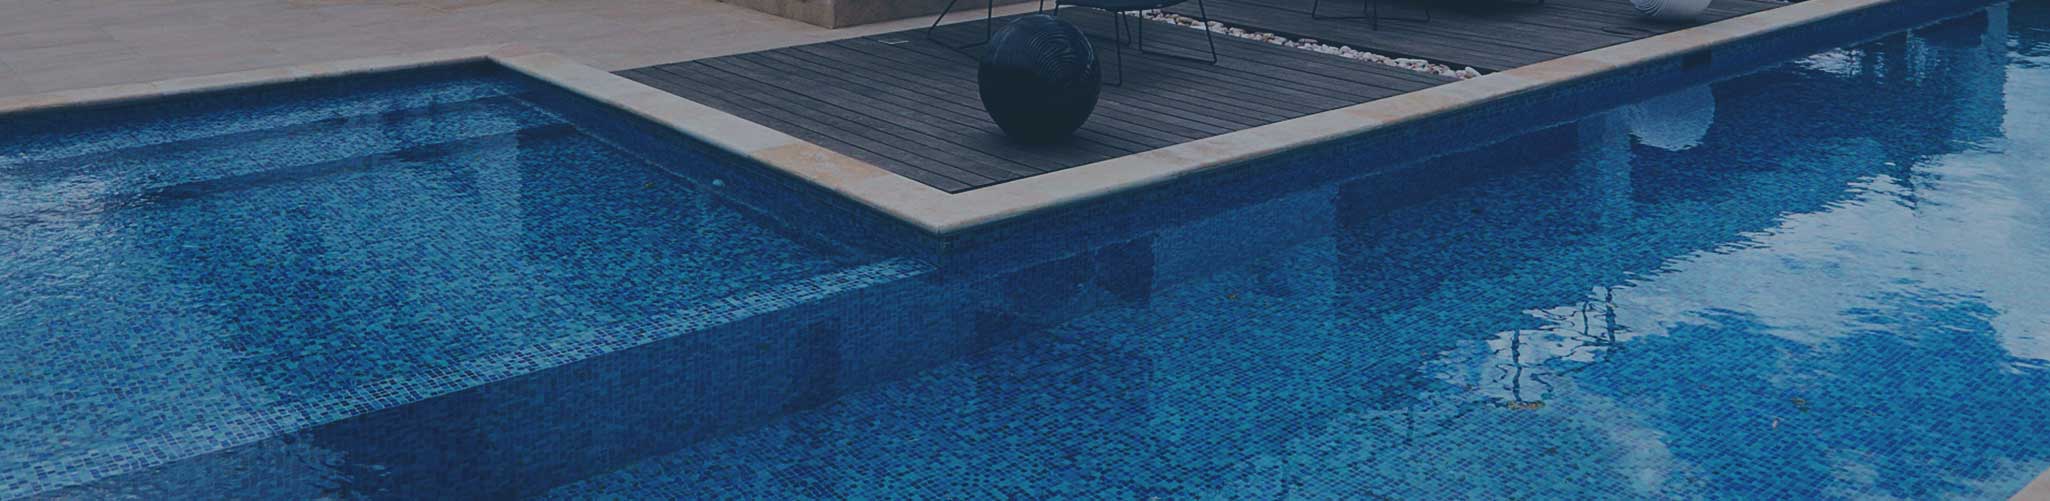 Pool Repair Service – Required For All Kind Of Pools